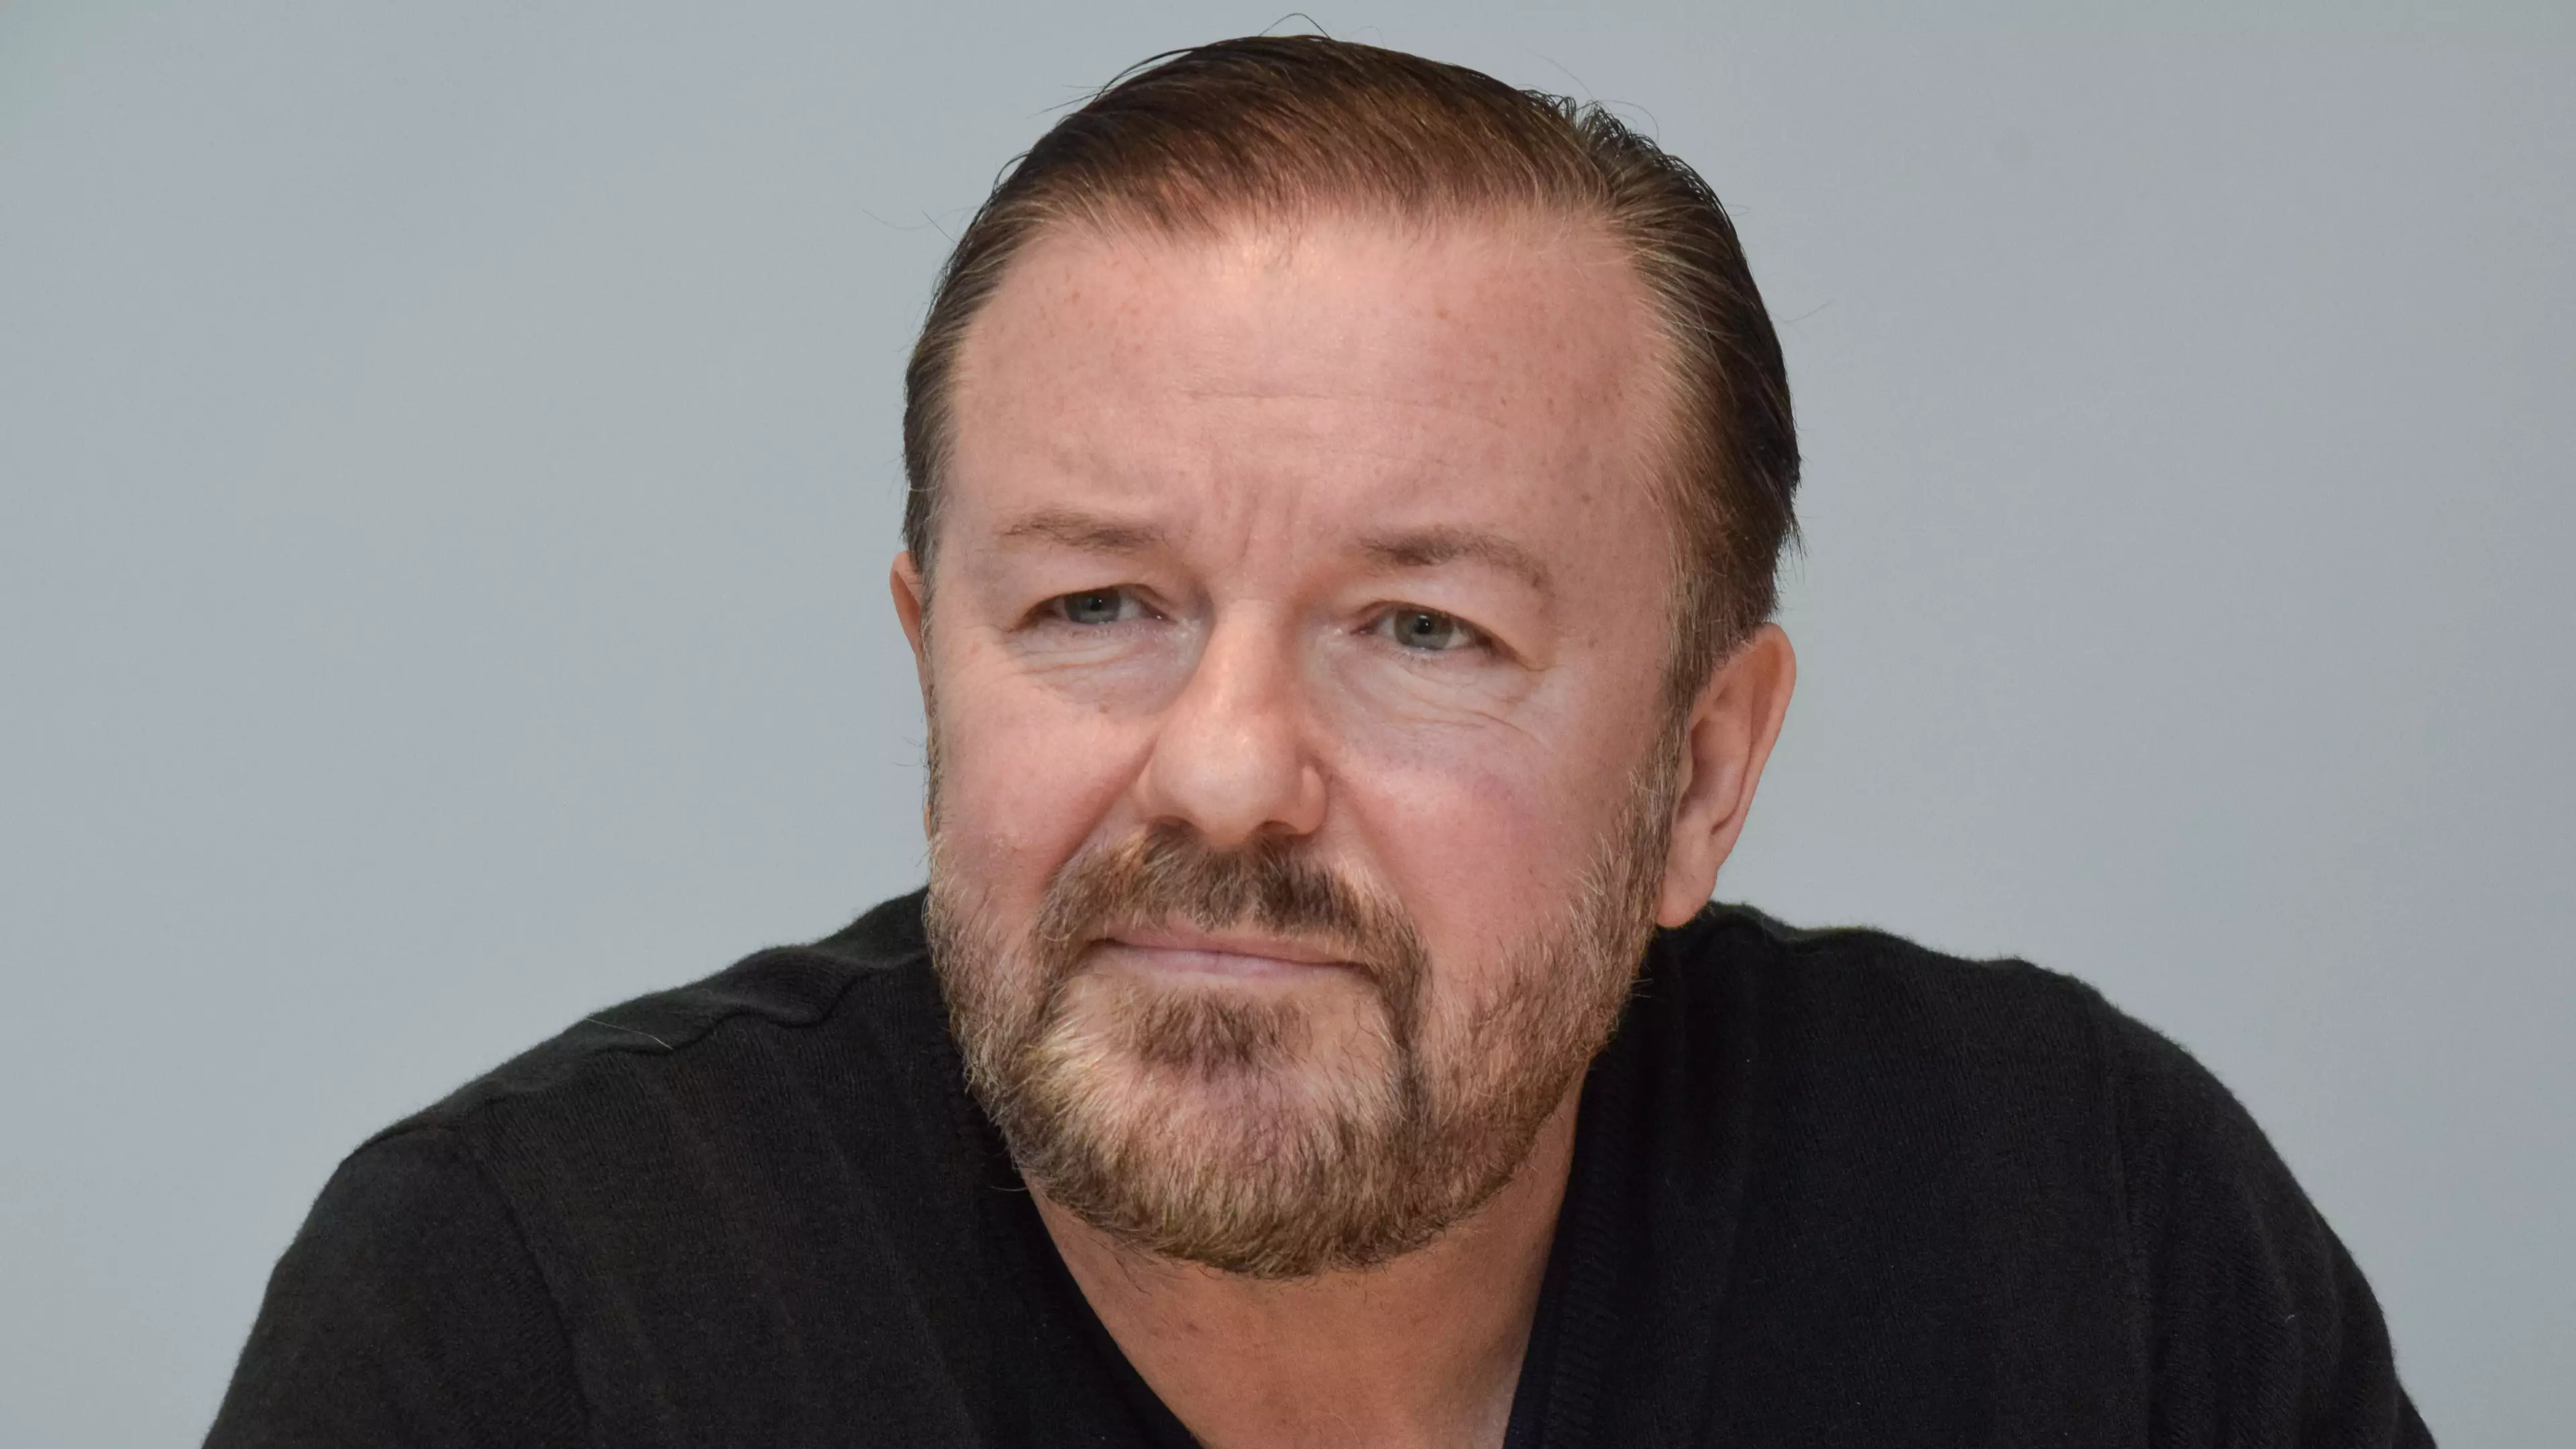 Ricky Gervais Scared He'll Be Wheelchair-Bound After Suffering From Back Problems